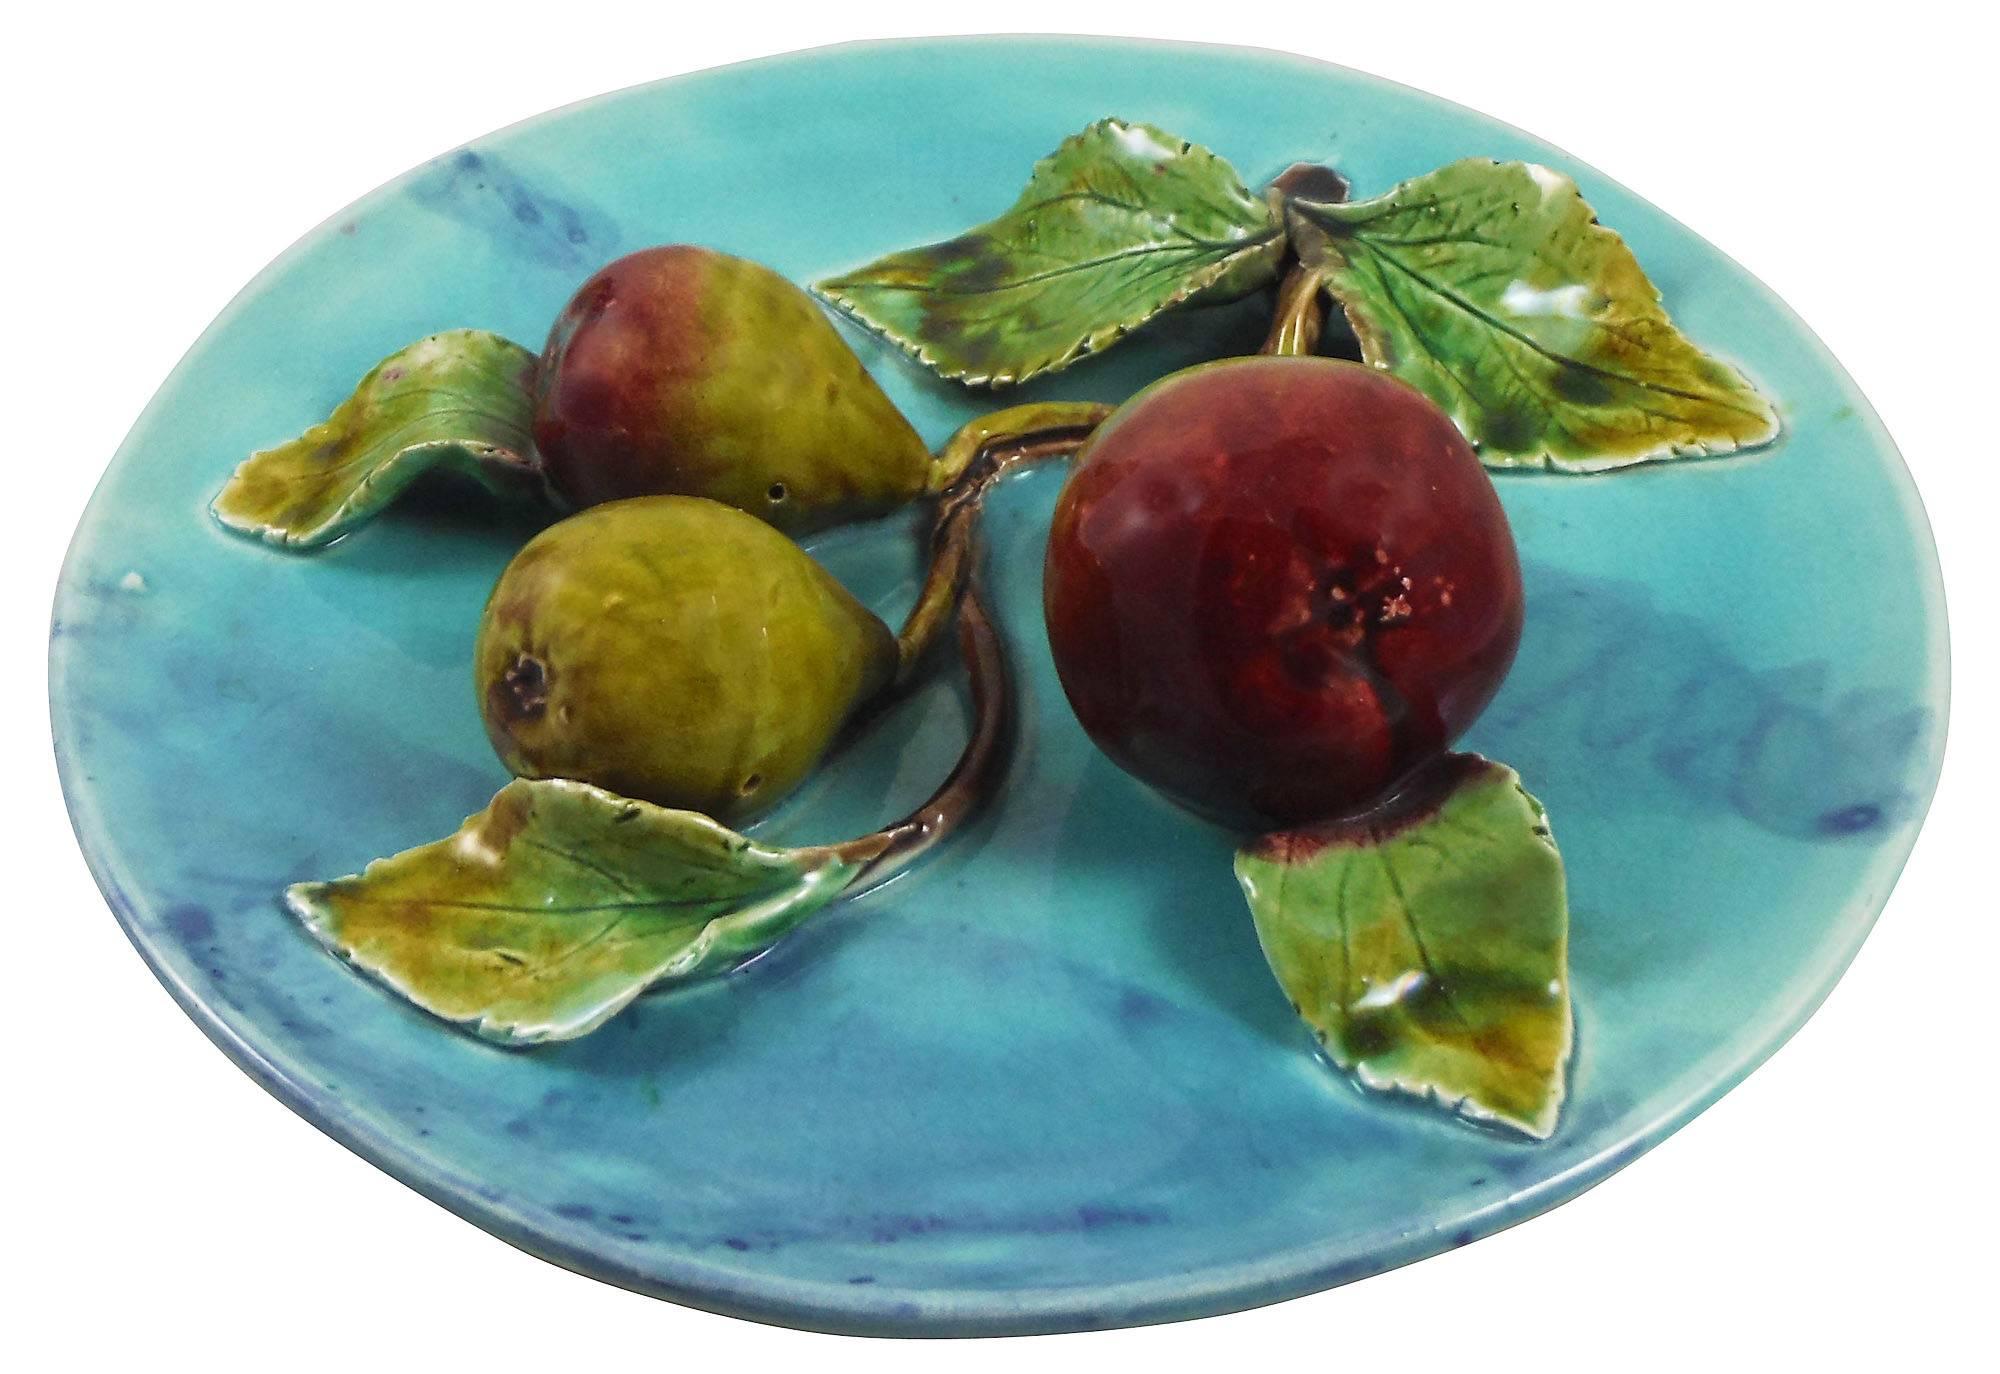 19th century colorful aqua turquoise Majolica pears wall platter attributed to Menton.
Usually Menton made more lemons and oranges on appliques and platters.